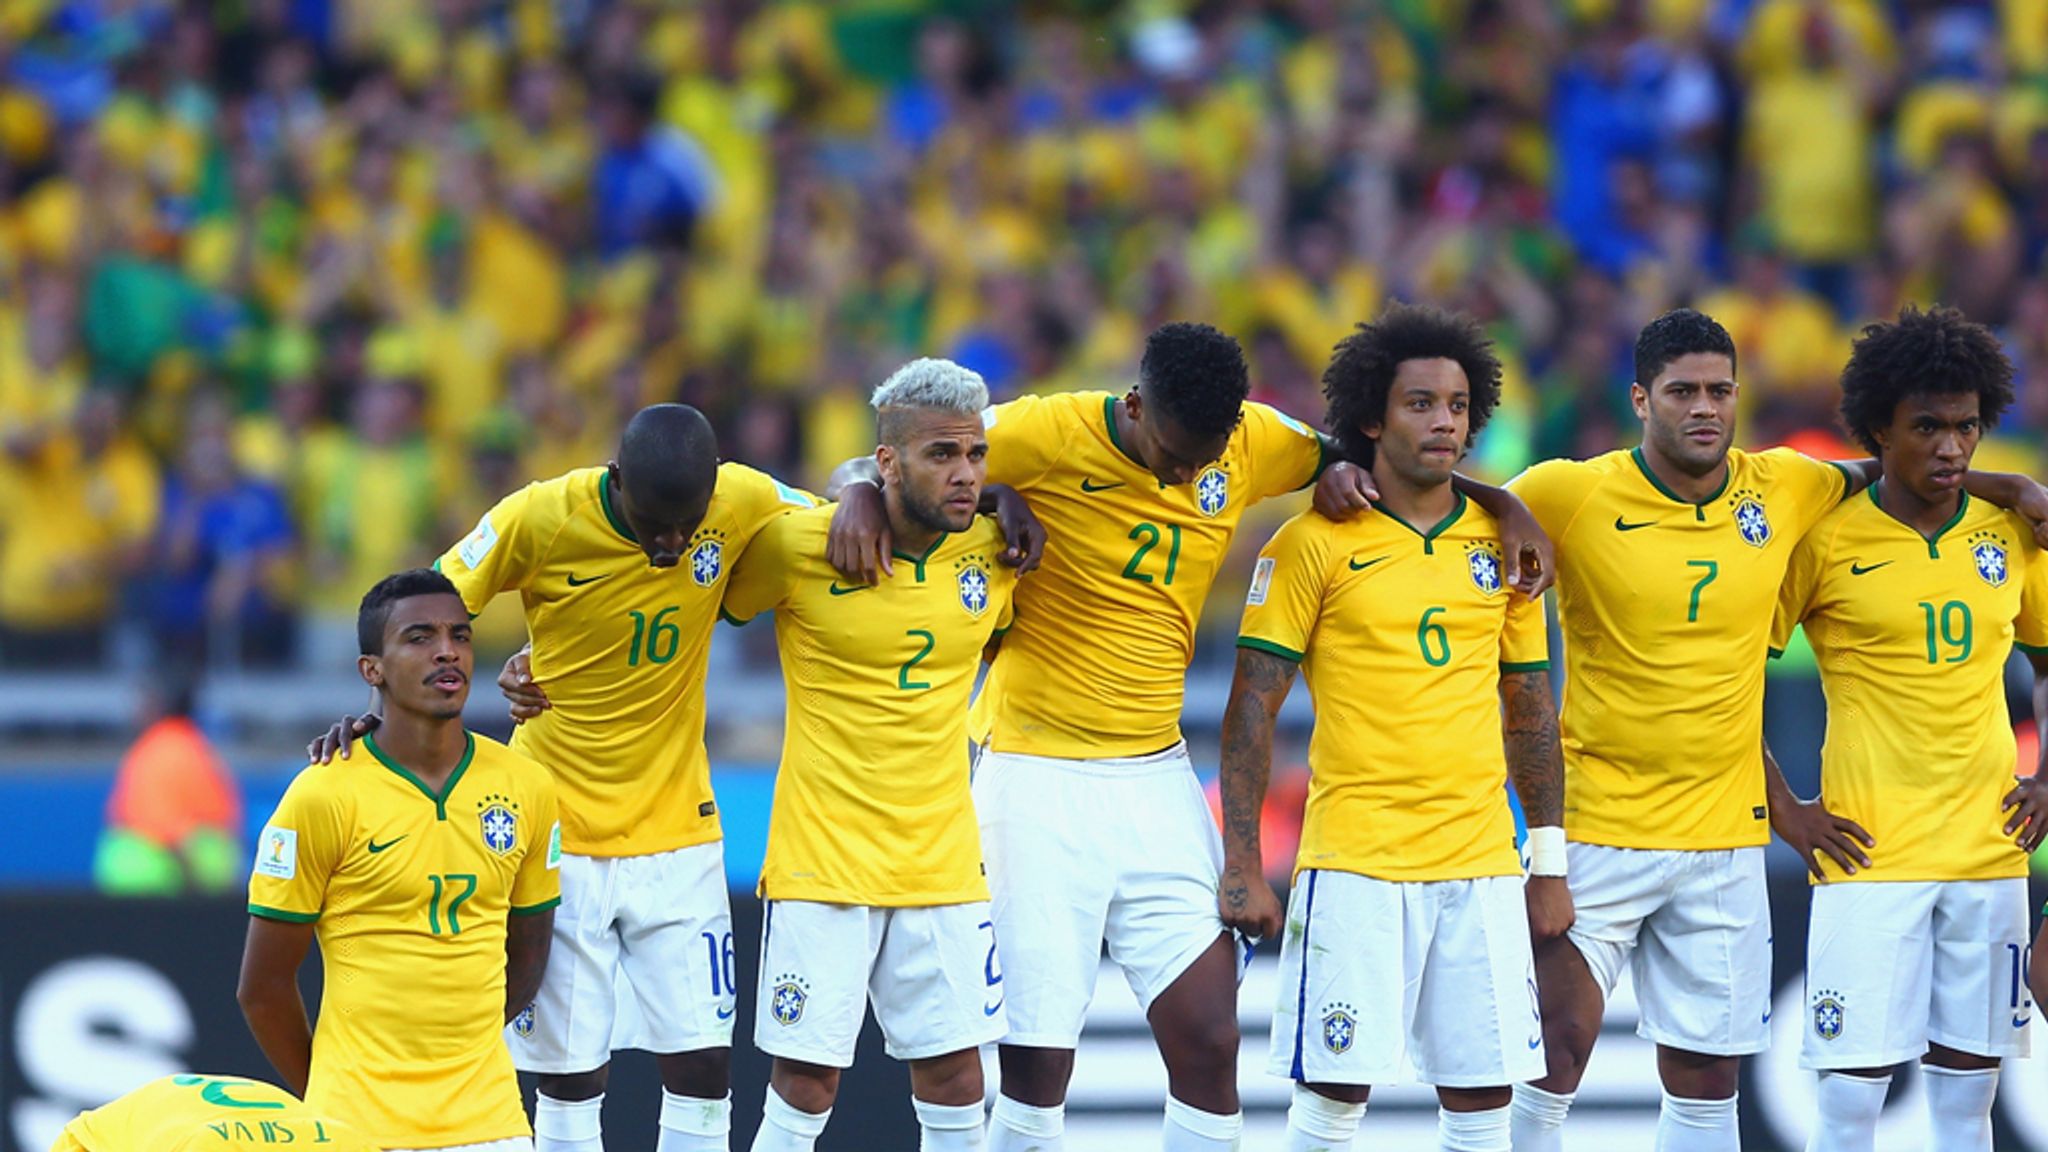 GUESS NATIONAL TEAM BY PLAYERS' CLUB - BRAZIL 2014 WORLD CUP